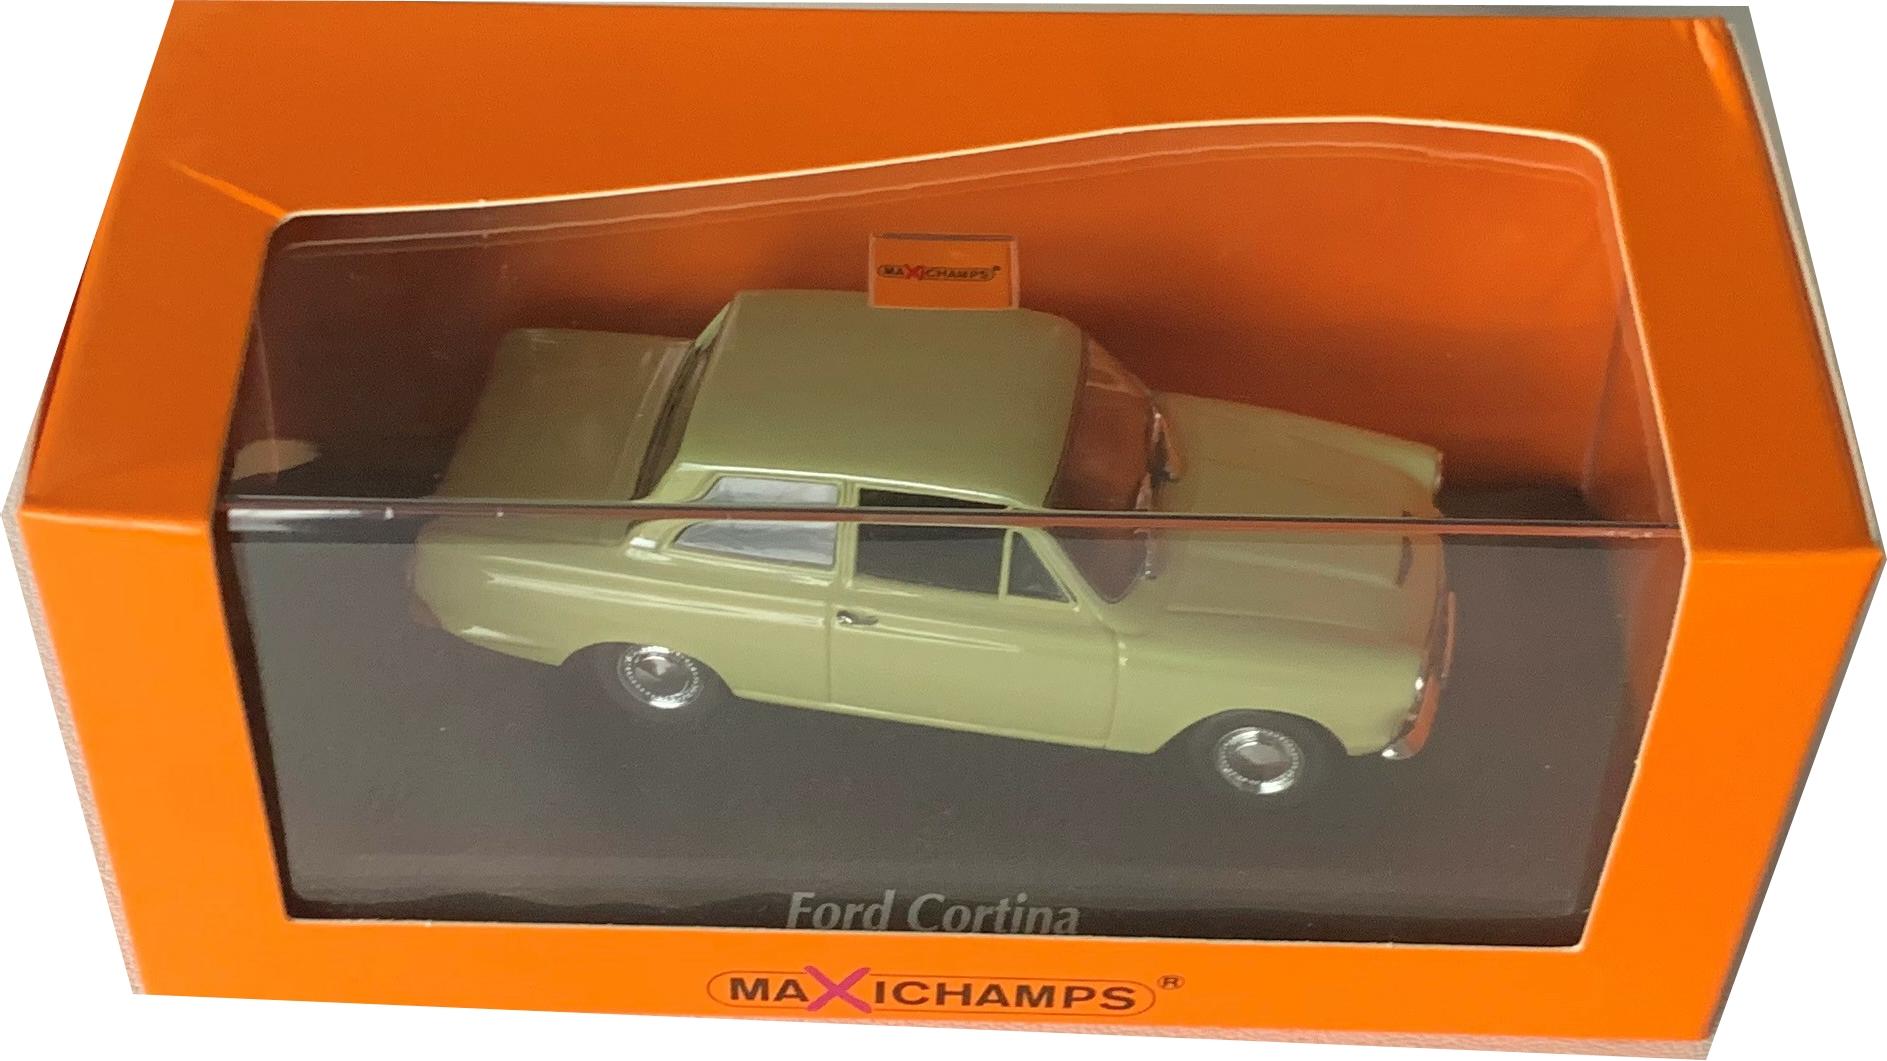 Ford Cortina mk 1, 2 door in green 1962, 1:43 scale model from Maxichamps